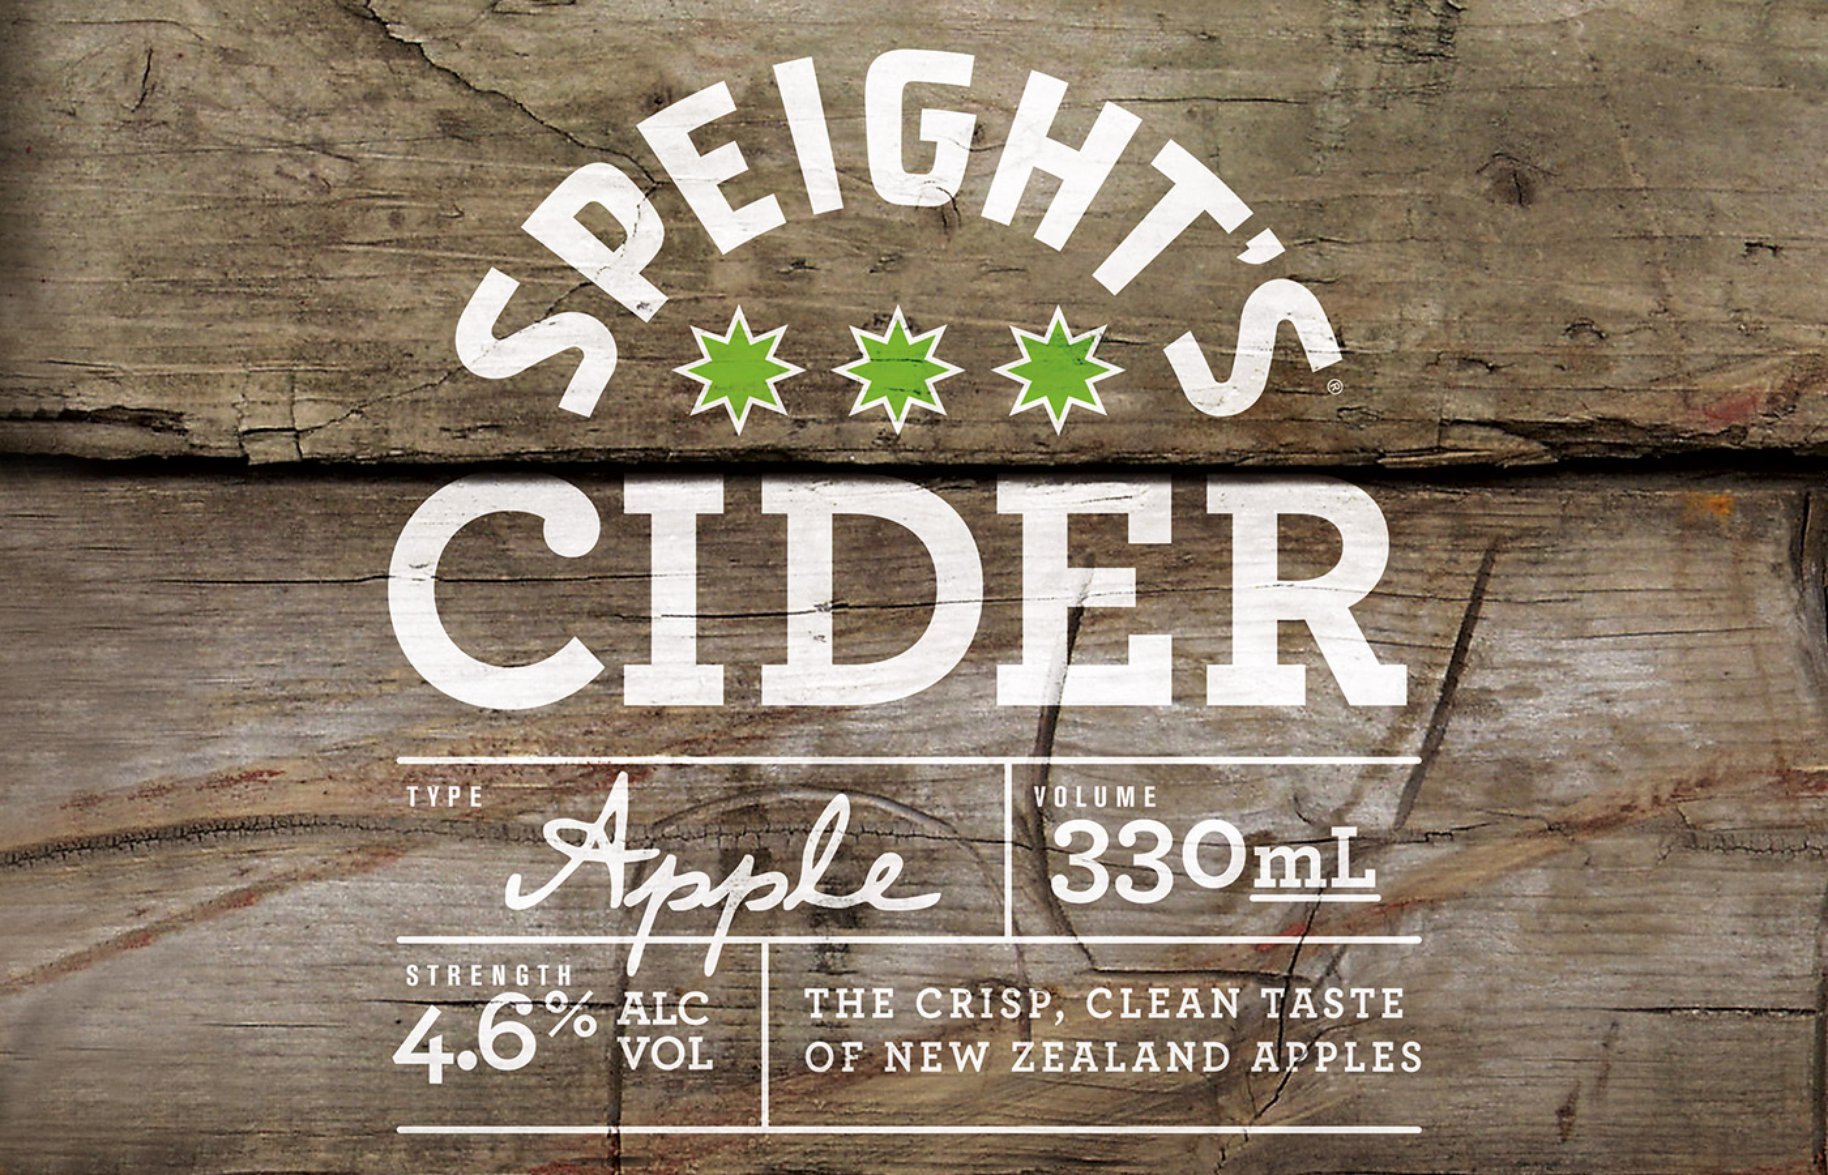 Speight's cider logo on crate